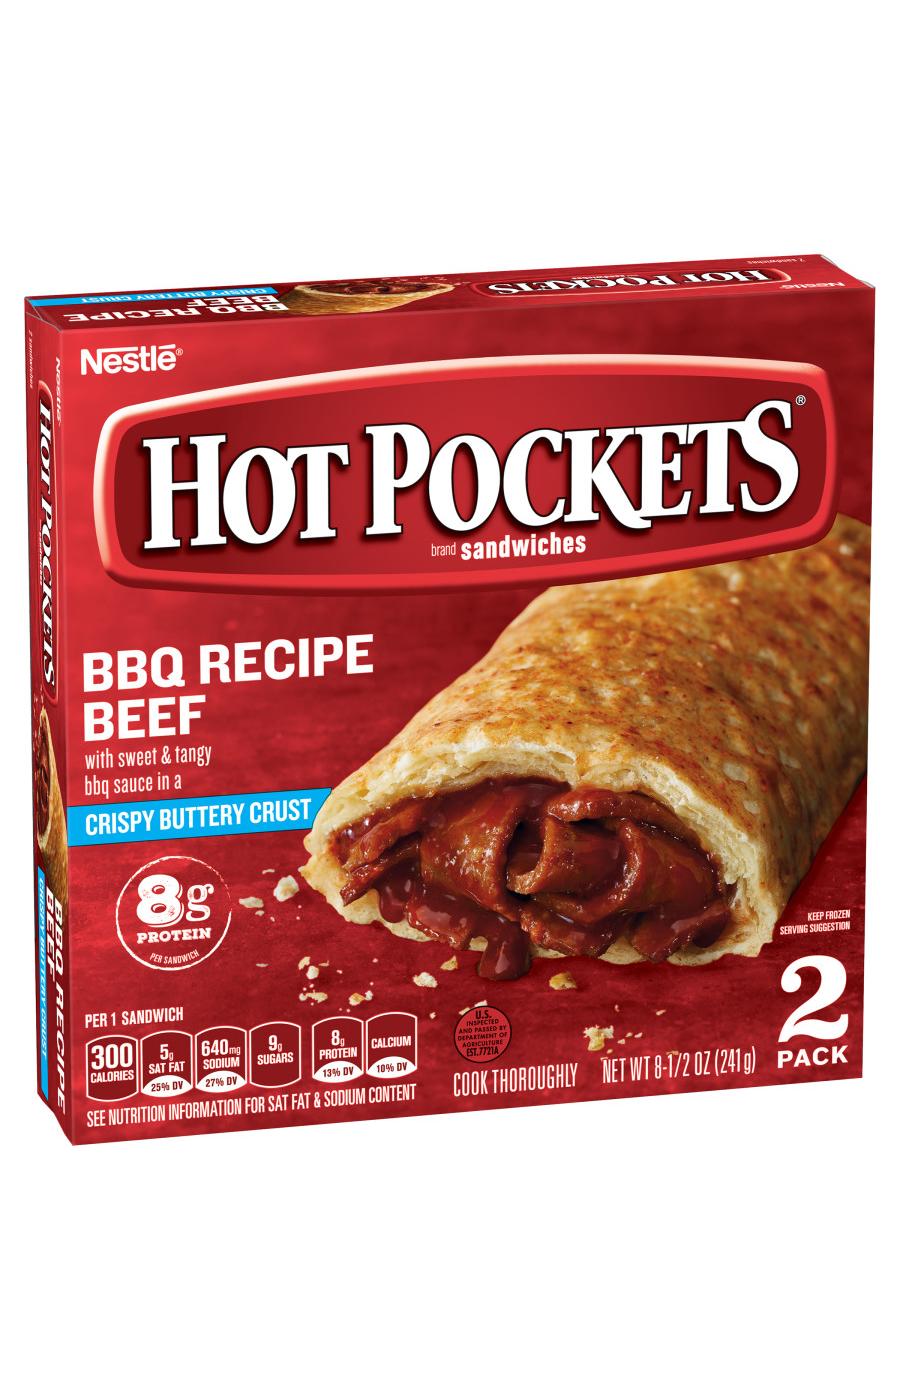 Hot Pockets BBQ Recipe Beef Crispy Buttery Crust Frozen Sandwiches; image 4 of 5